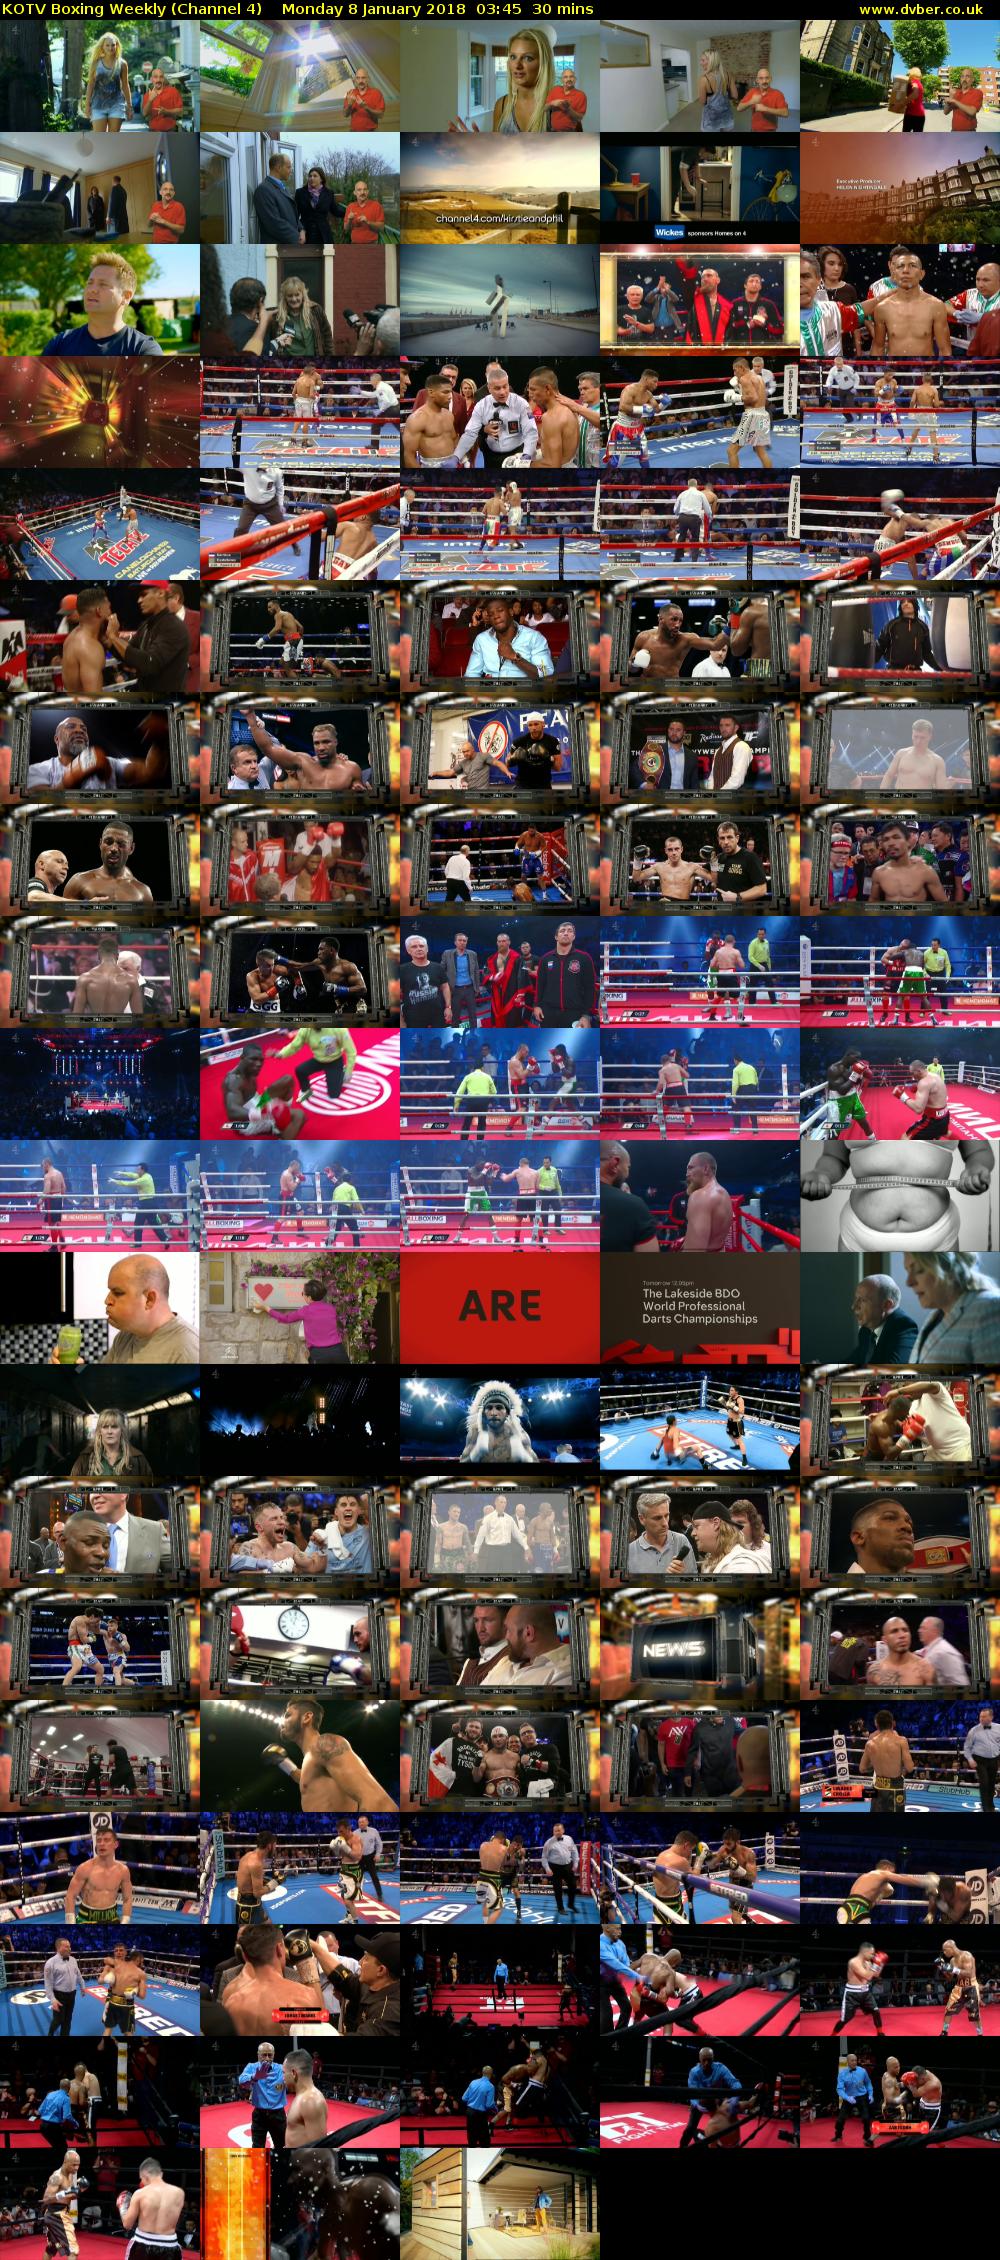 KOTV Boxing Weekly (Channel 4) Monday 8 January 2018 03:45 - 04:15